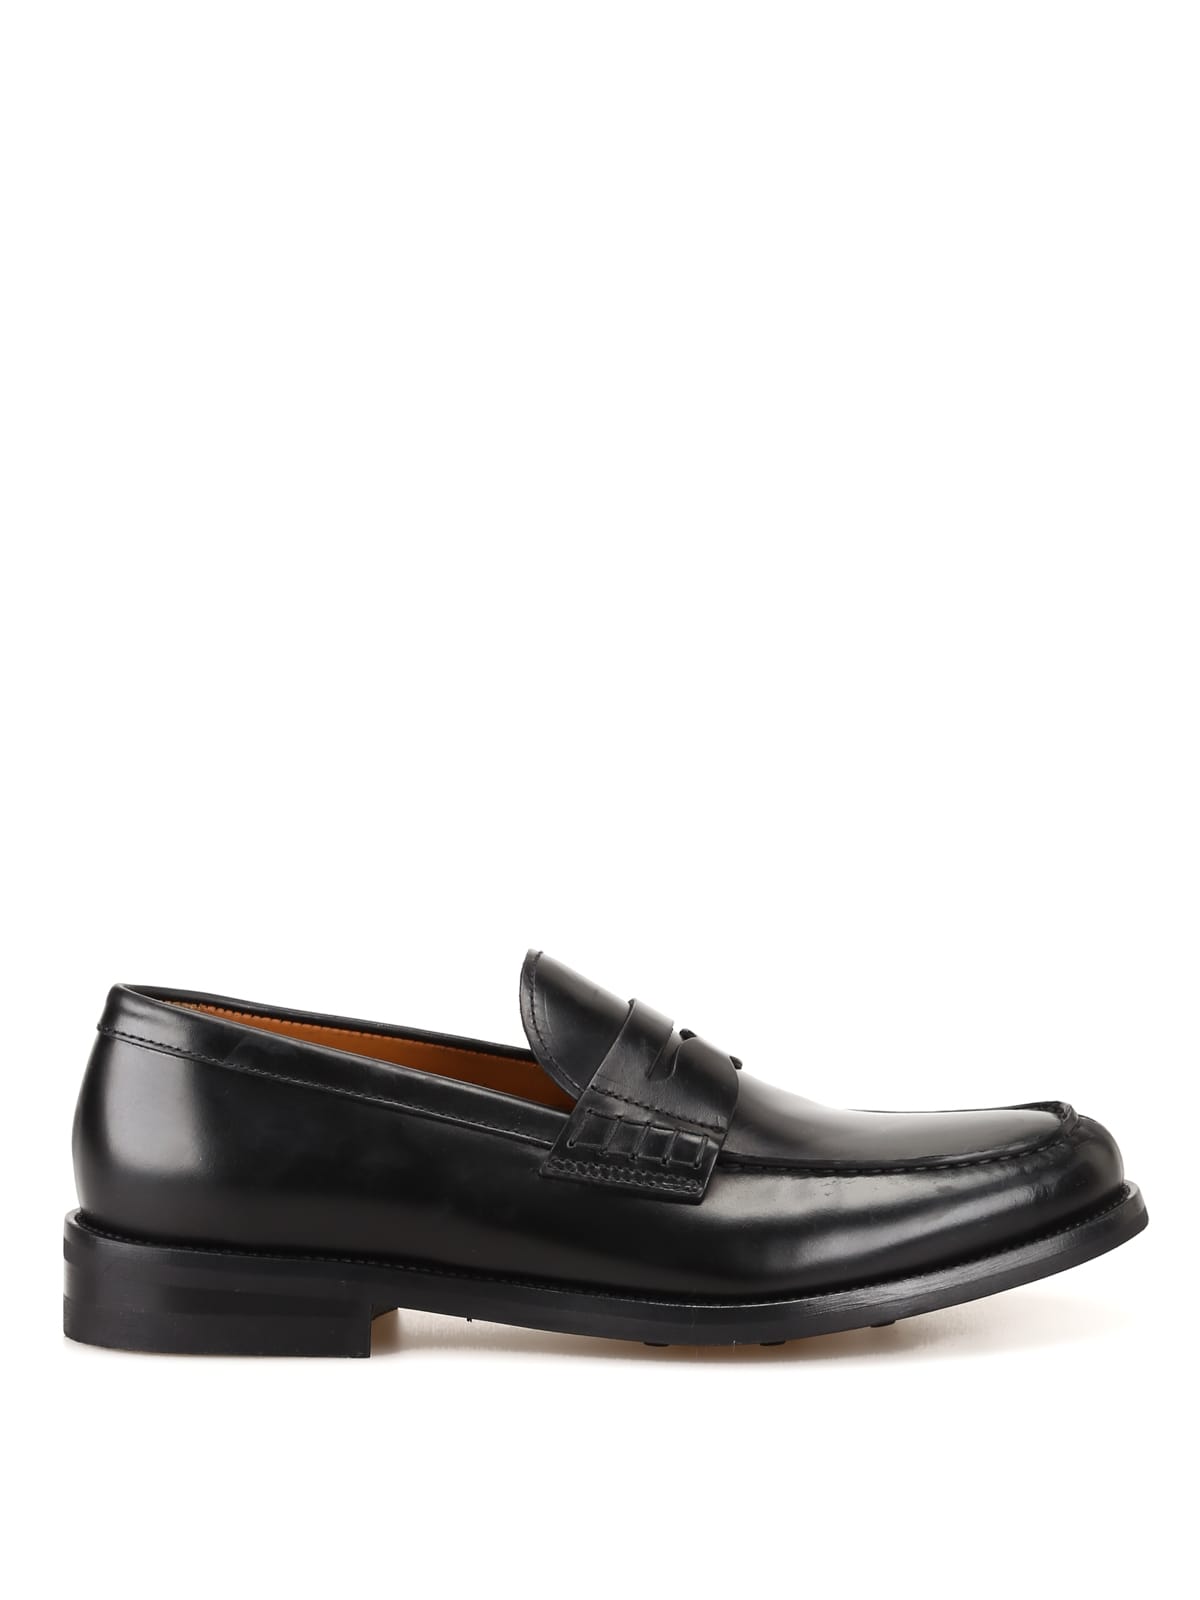 Doucal's Penny Loafer Horse | Smart Closet